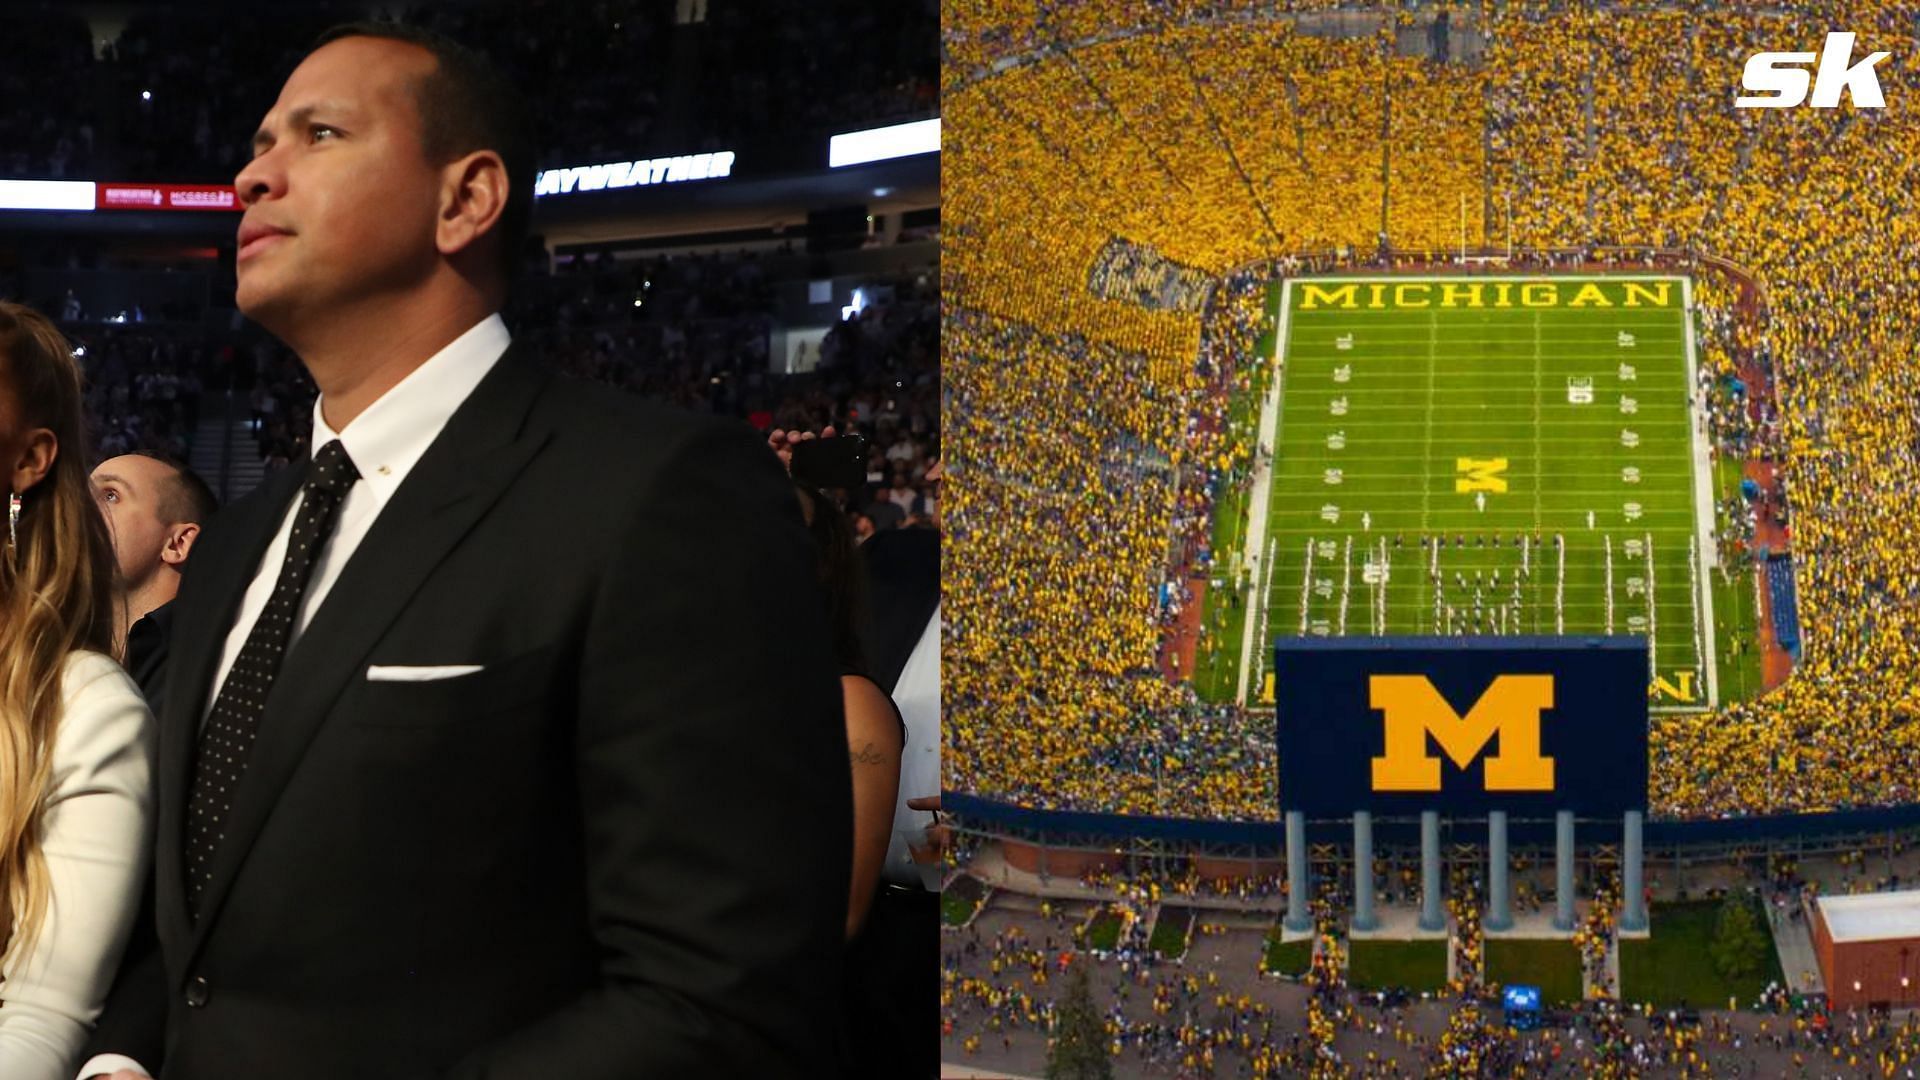 Alex Rodriguez took in a U Michigan football game with his daughter